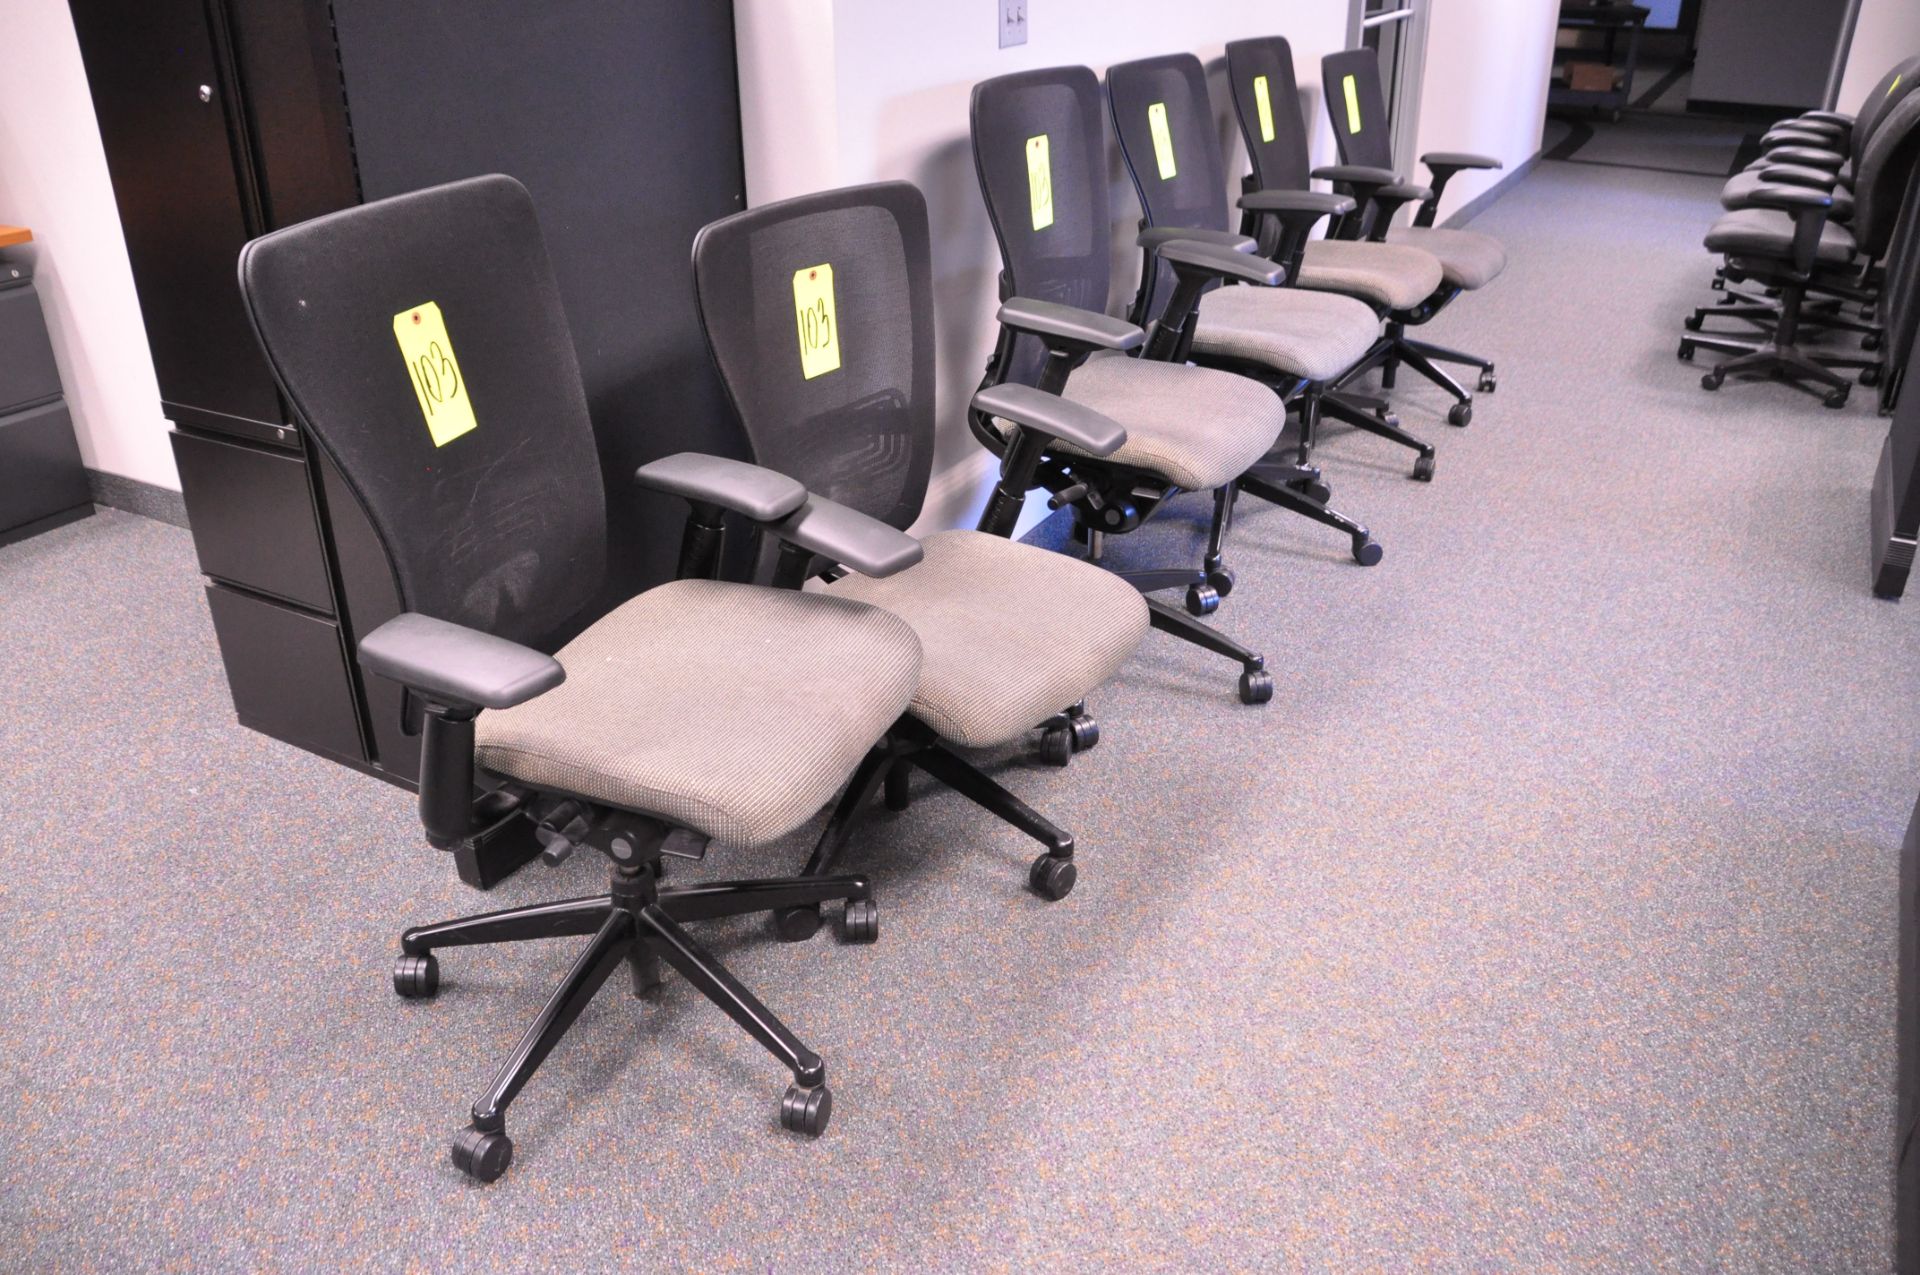 Lot-(6) Ergonomic Black/Grey Swivel Office Chairs in (1) Group, (Located 1st Floor Offices) - Image 2 of 2